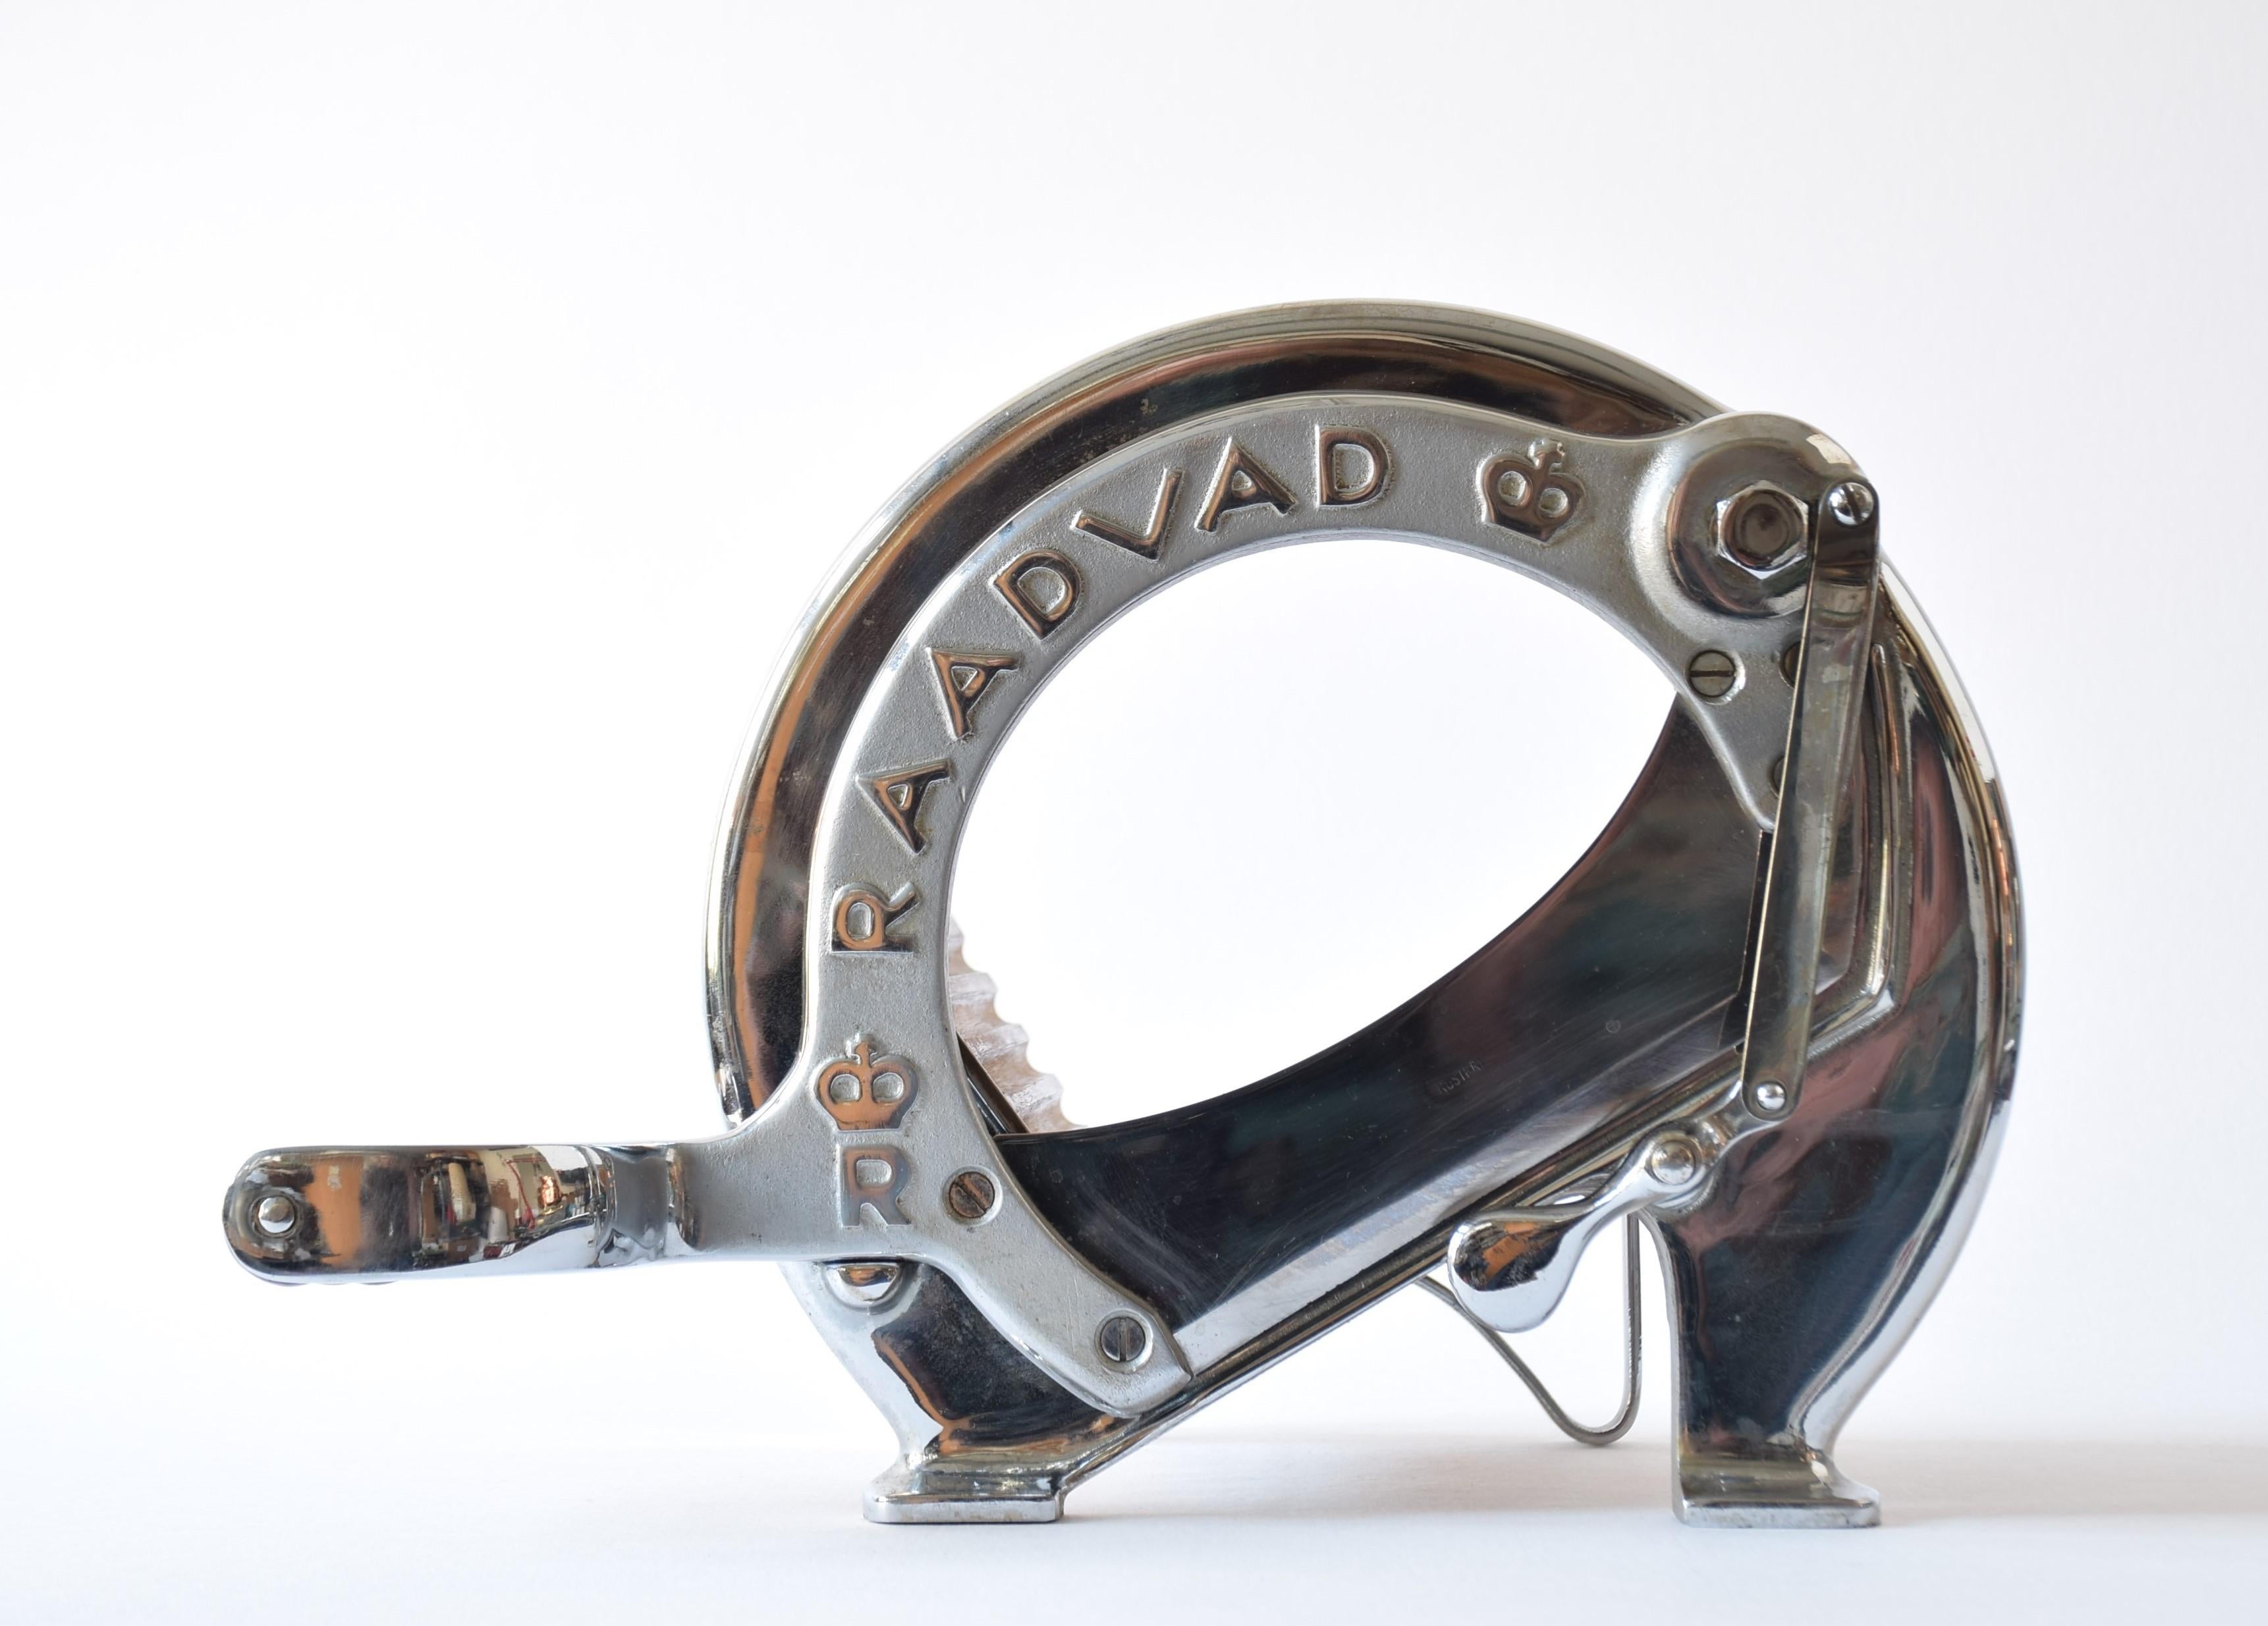 Original vintage Danish Raadvad bread slicer in the rare chrome version!

Manufactured by the famous Danish Company RAADVAD ca. 1950s. It is the model 294 which was designed by Ove Larsen in the 1930s and which has become a Danish design